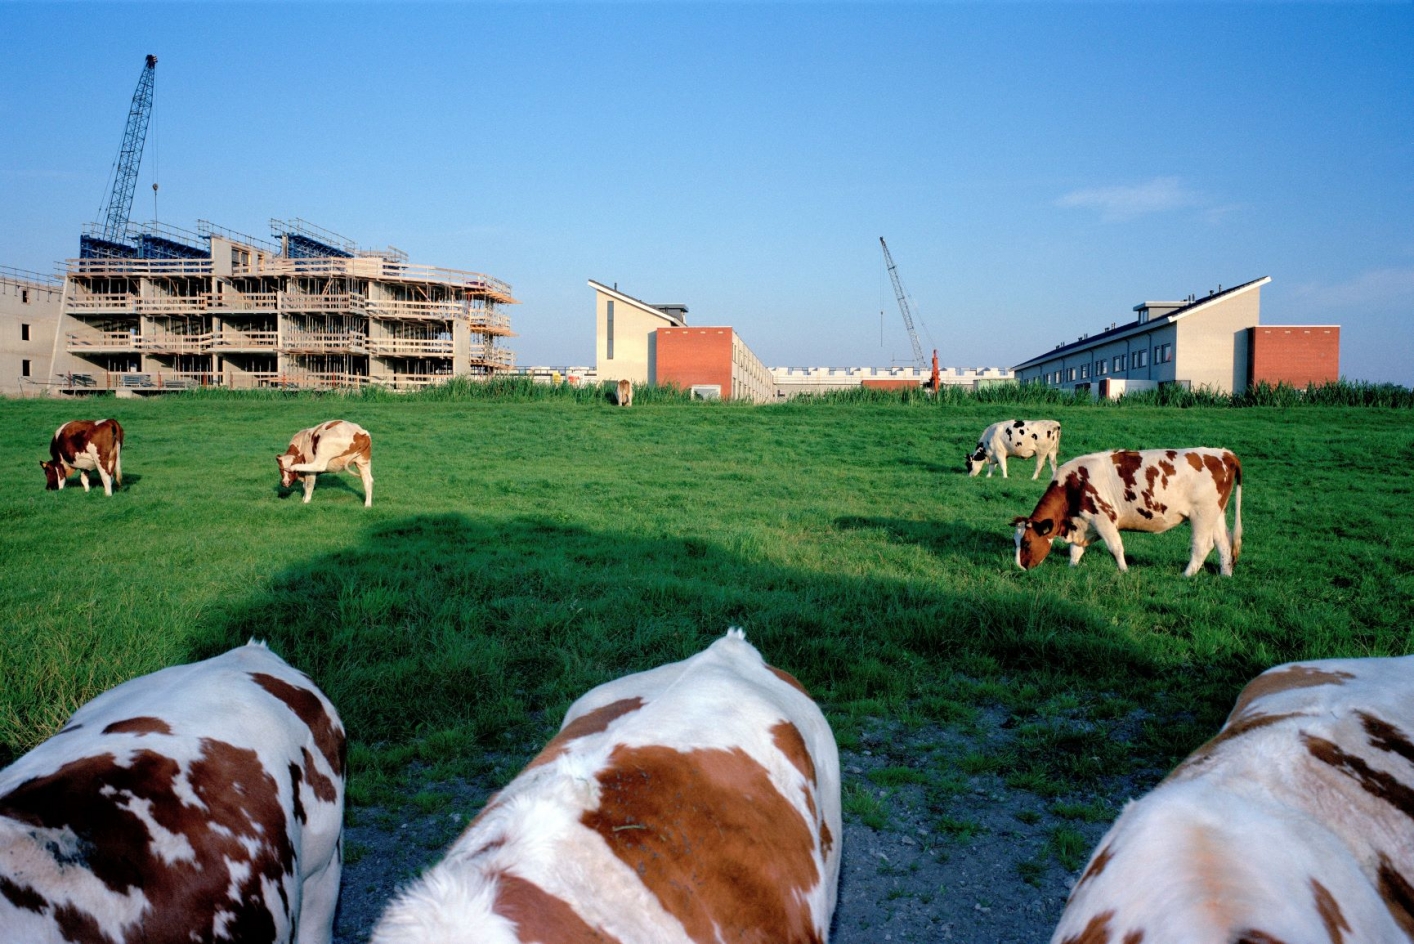 pasture with cows and housing in the background